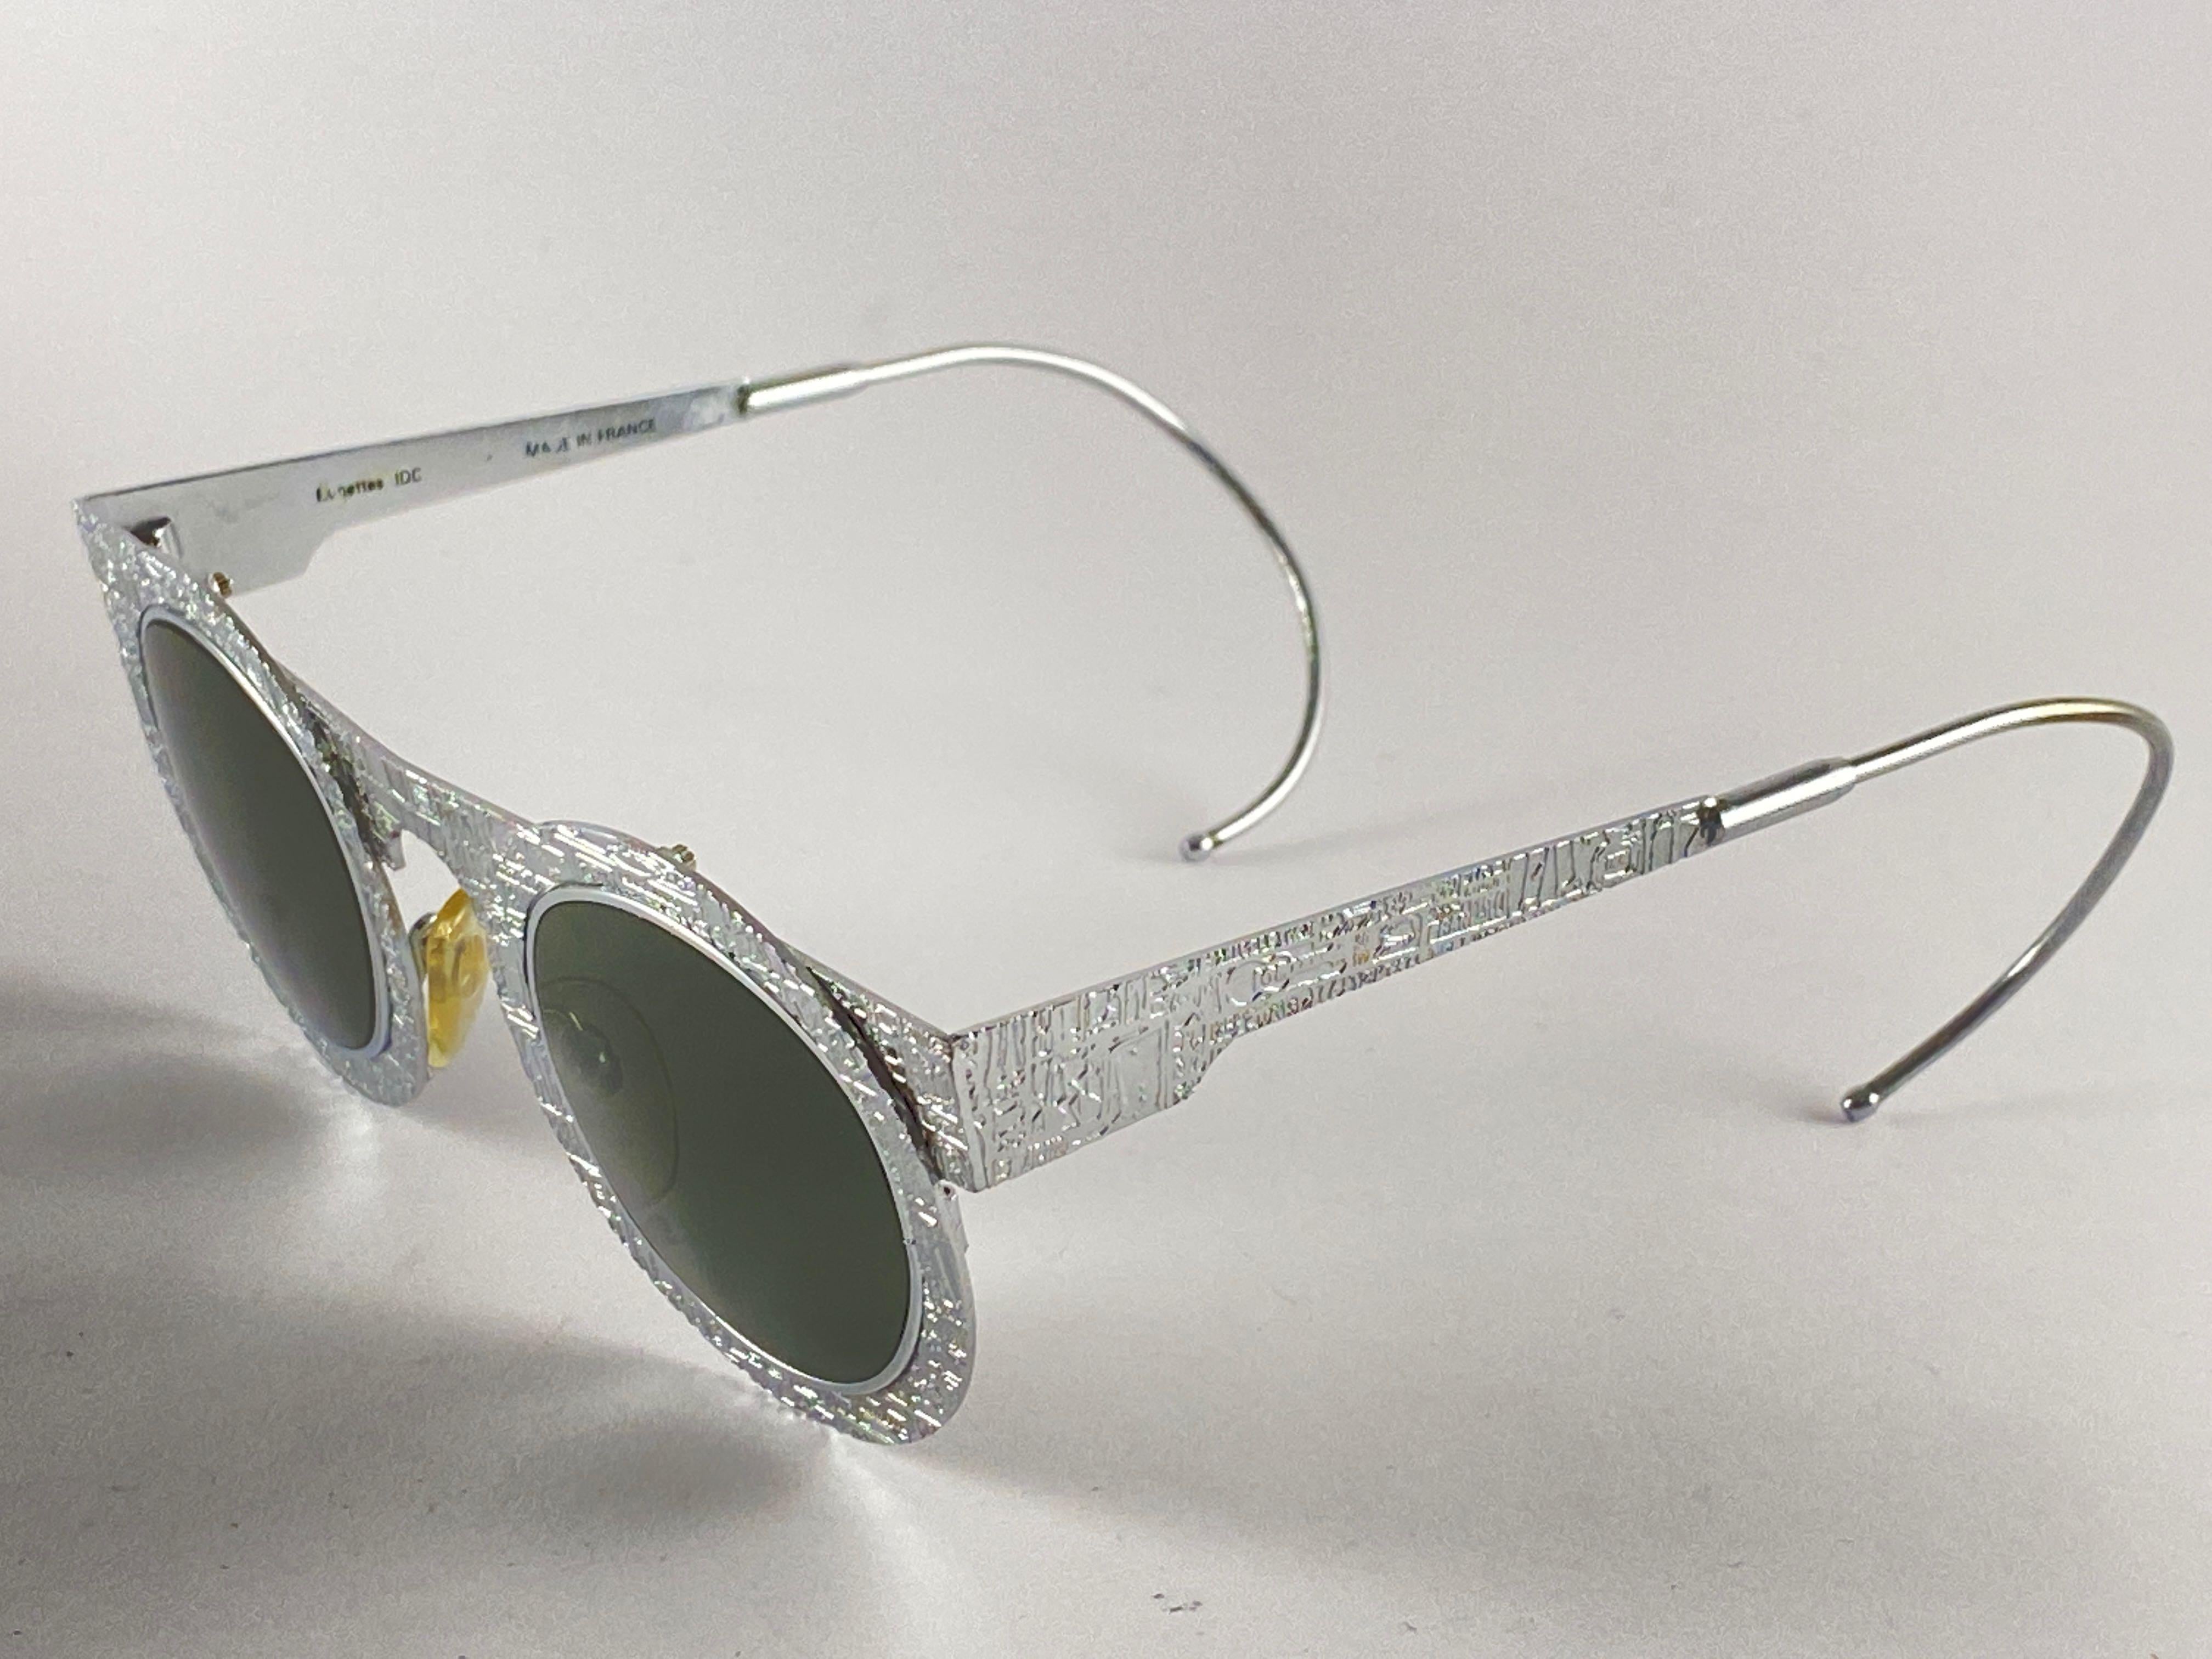 New Vintage IDC Pour Marithe Francois Girbaud Round Silver Sunglasses France For Sale 1